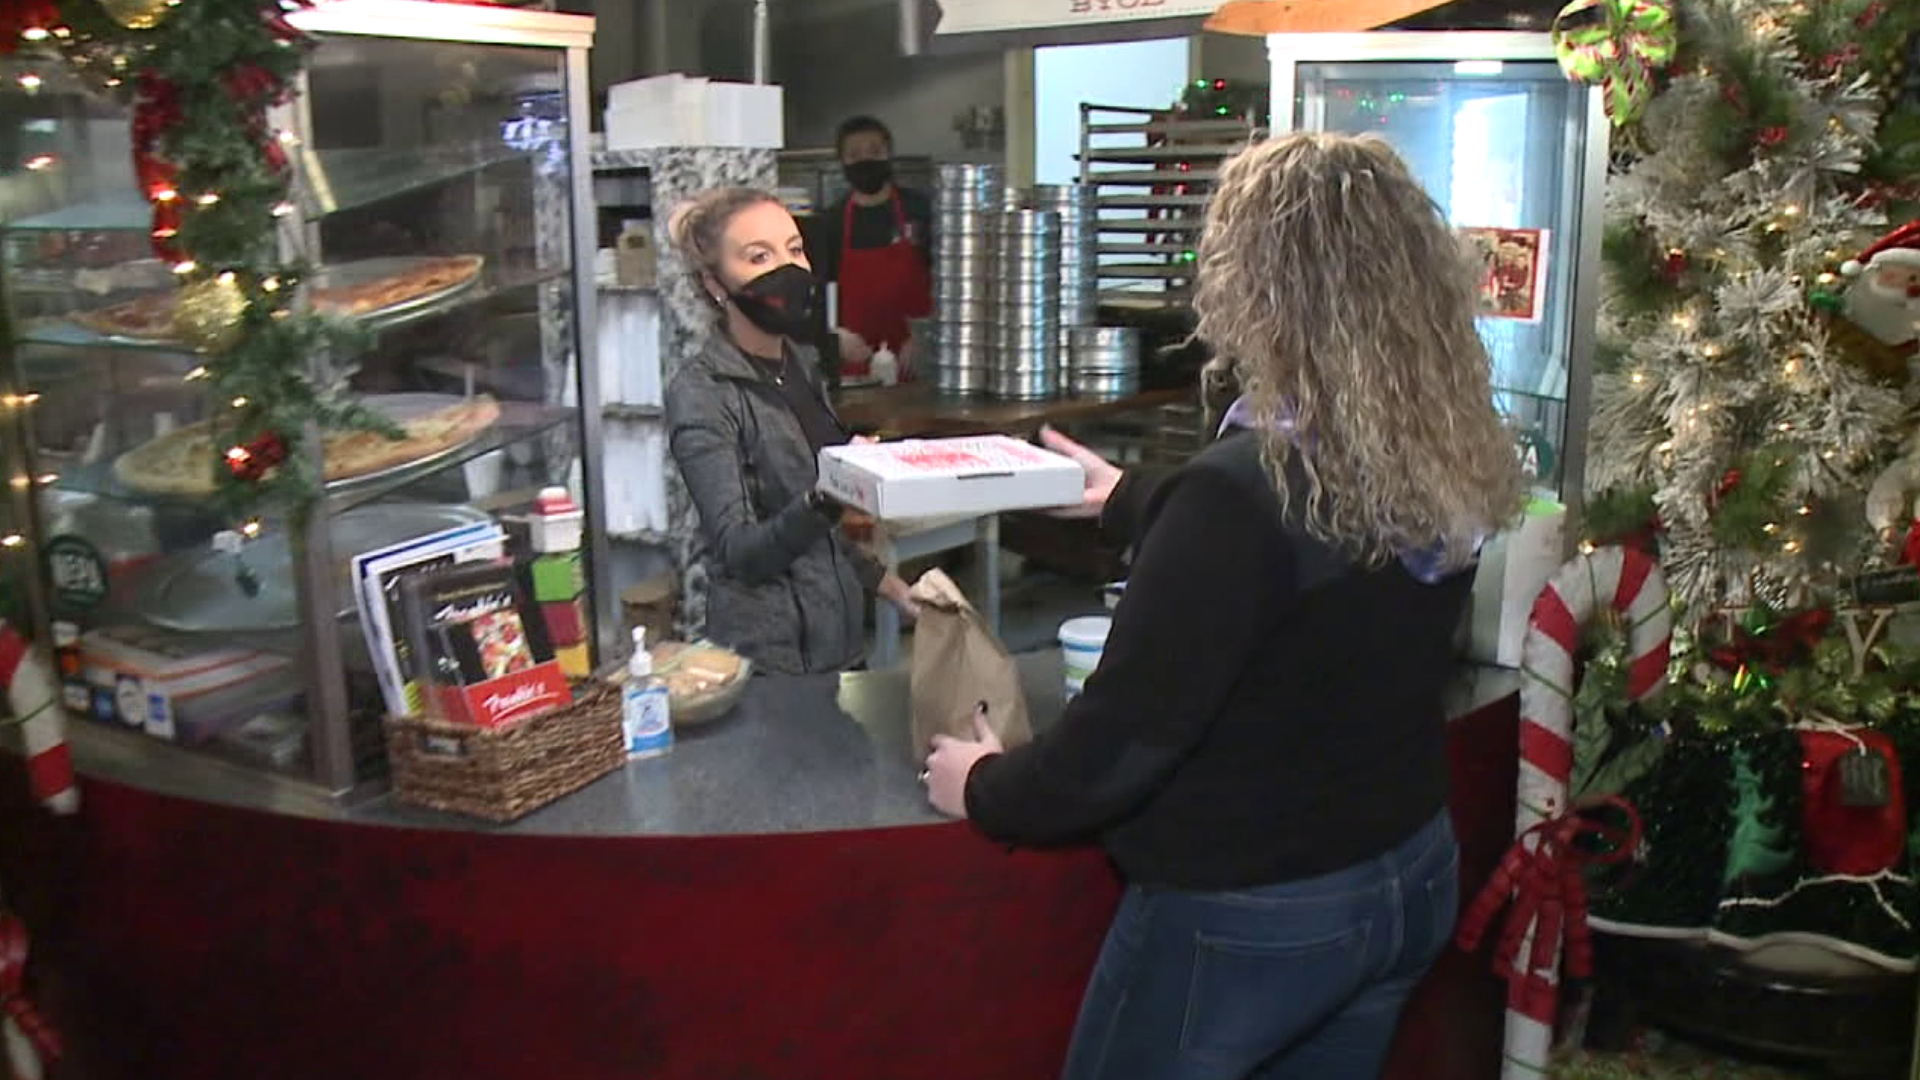 The United Way of Greater Hazleton is offering a one-time grant for restaurant workers in need.